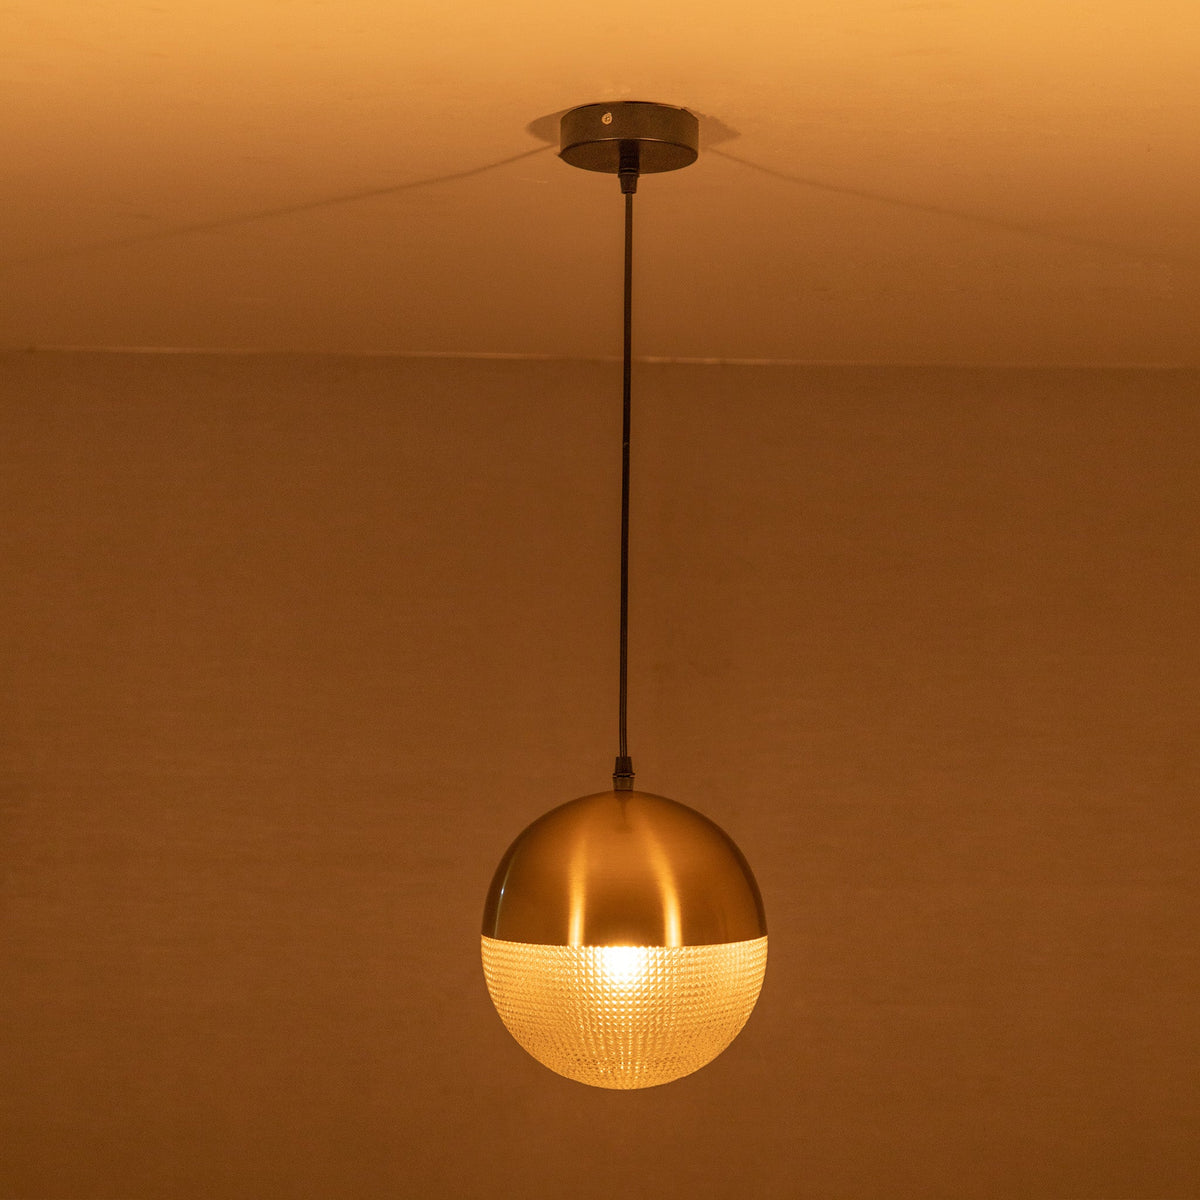 Buy Have a Ball Pendant Light online